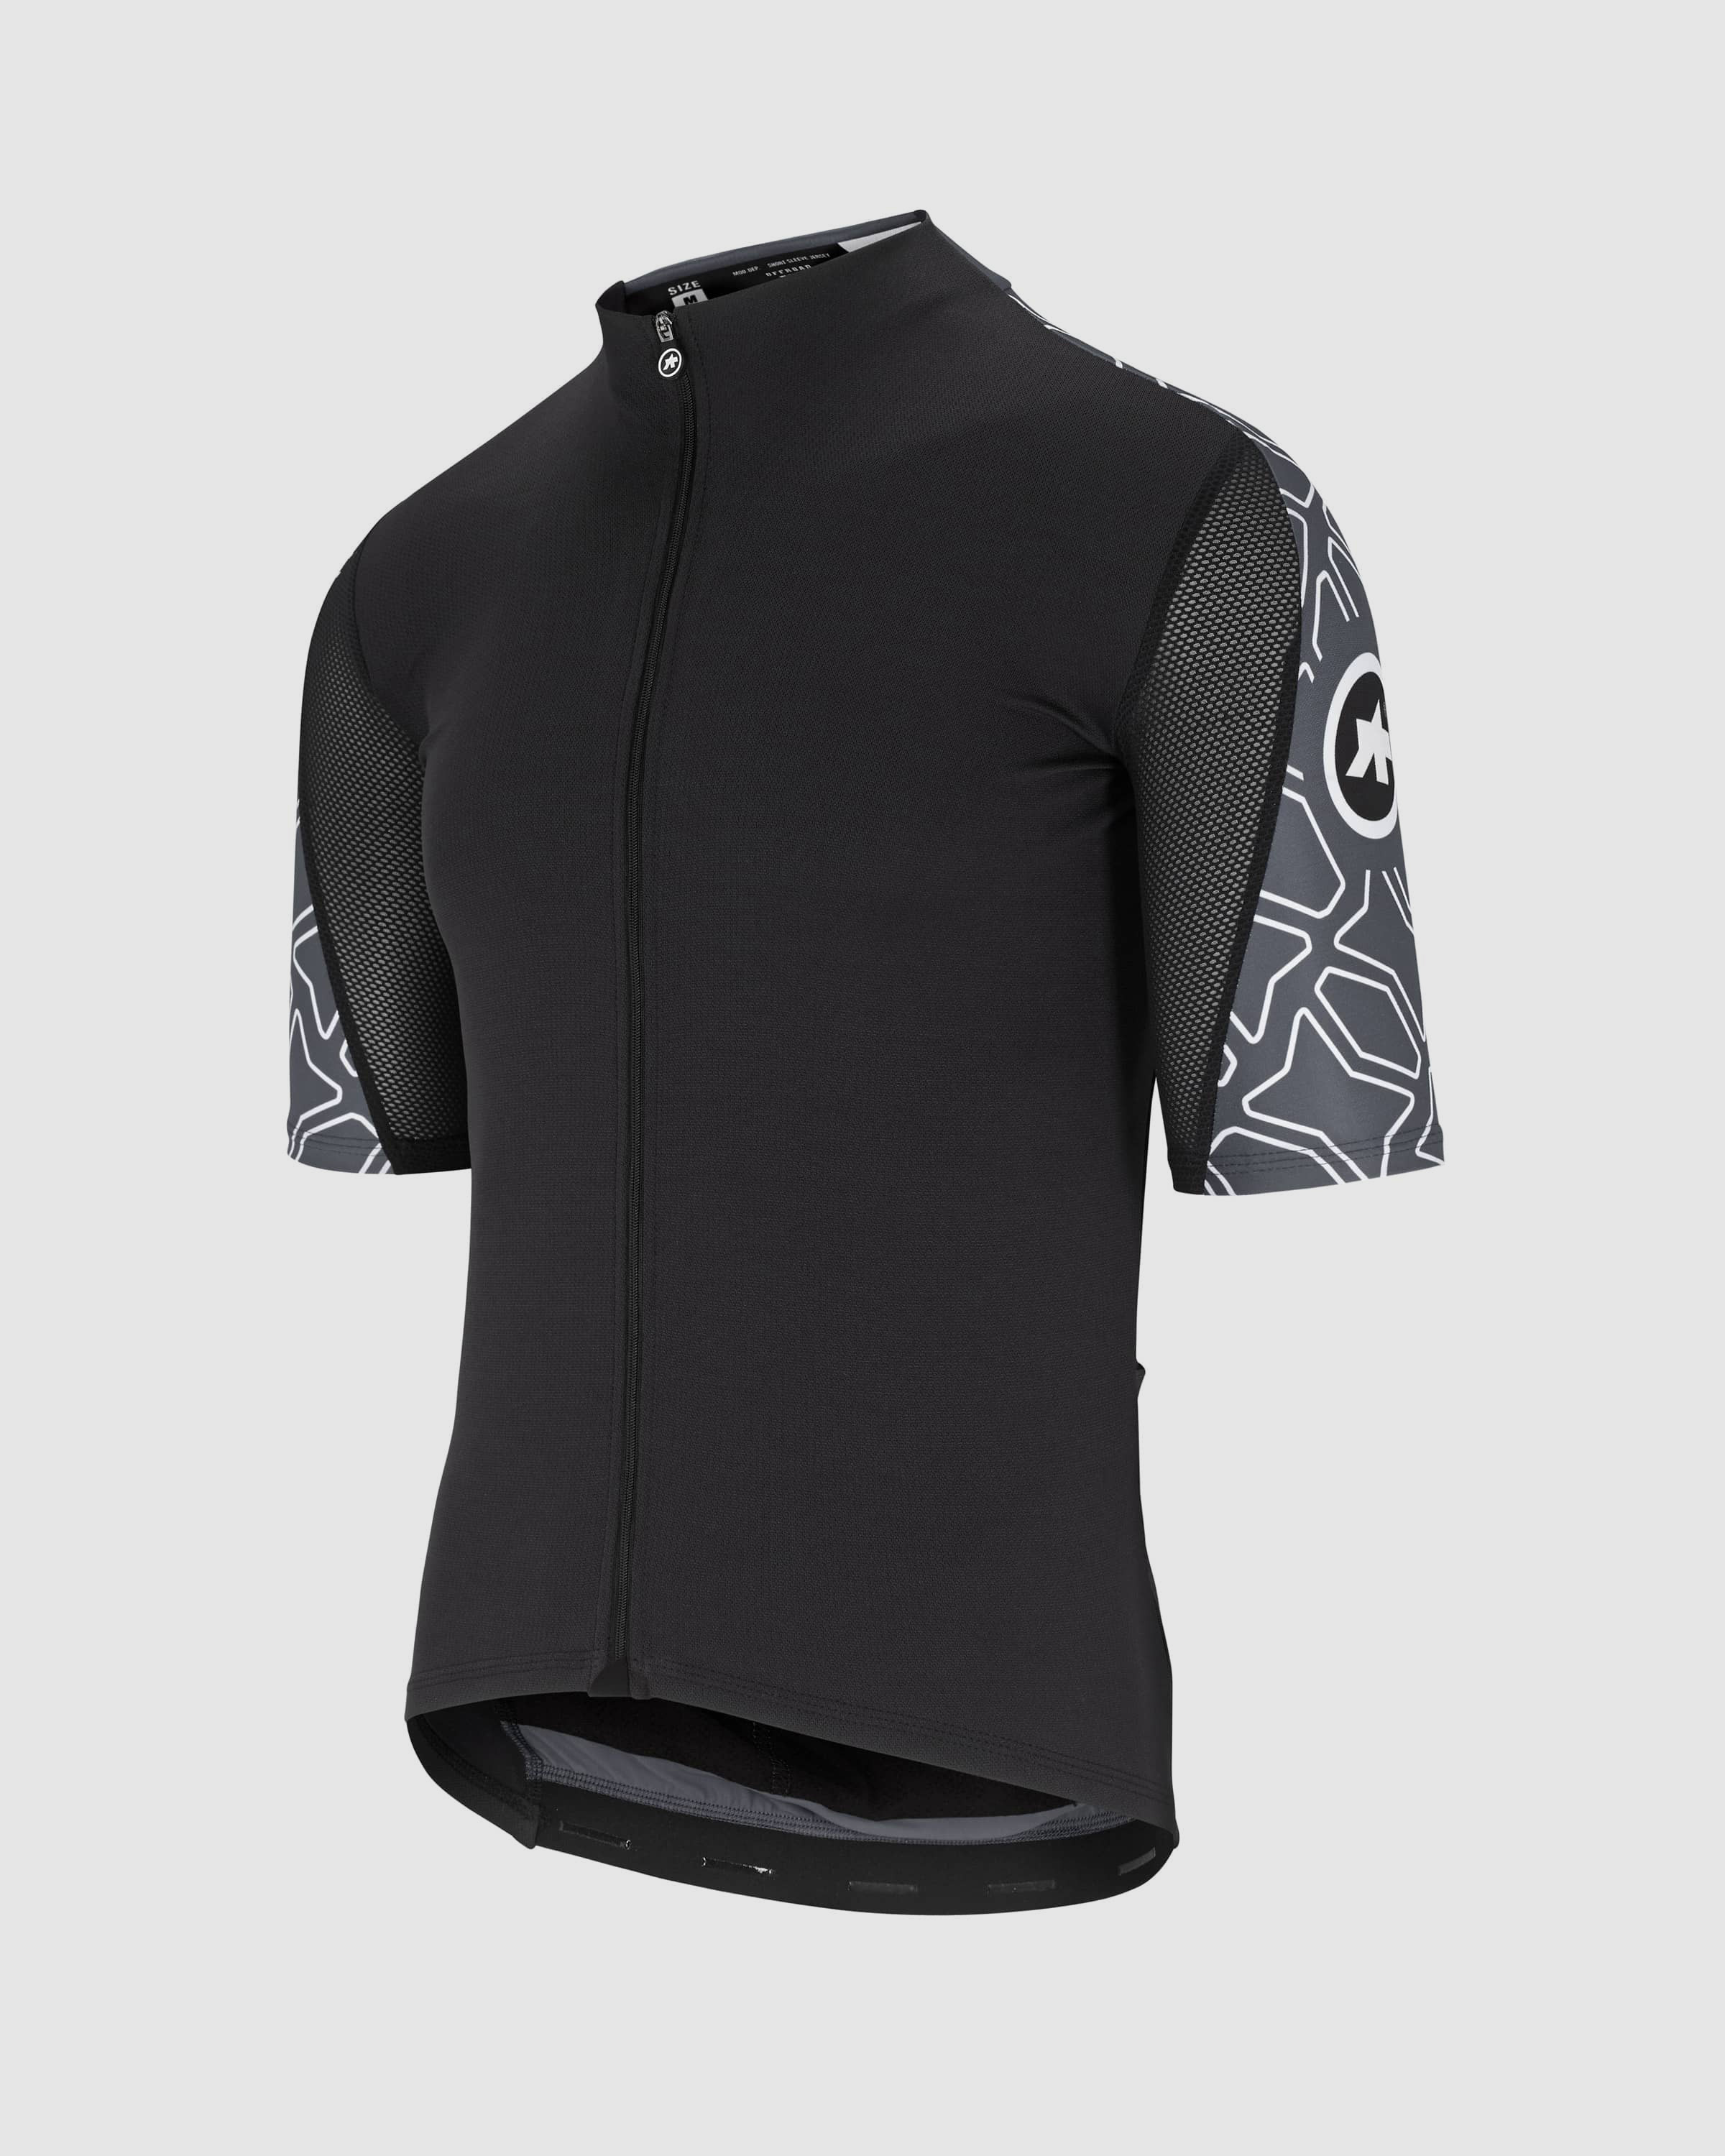 XC short sleeve jersey - ASSOS Of Switzerland - Official Outlet